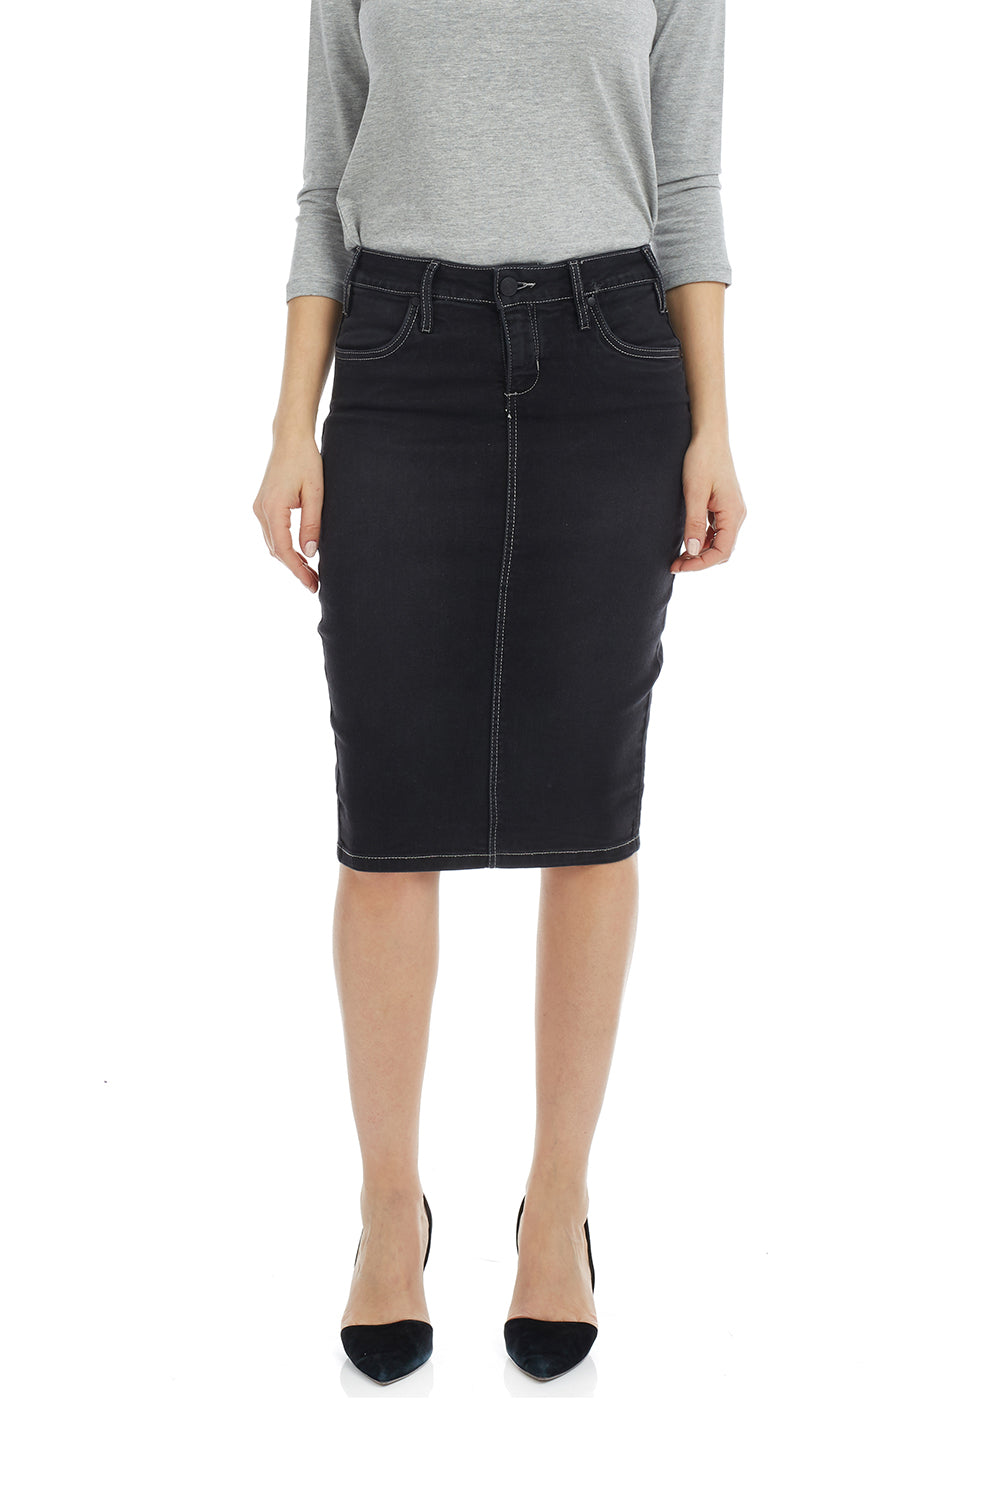 black stretchy jean pencil skirt with zipper and pockets